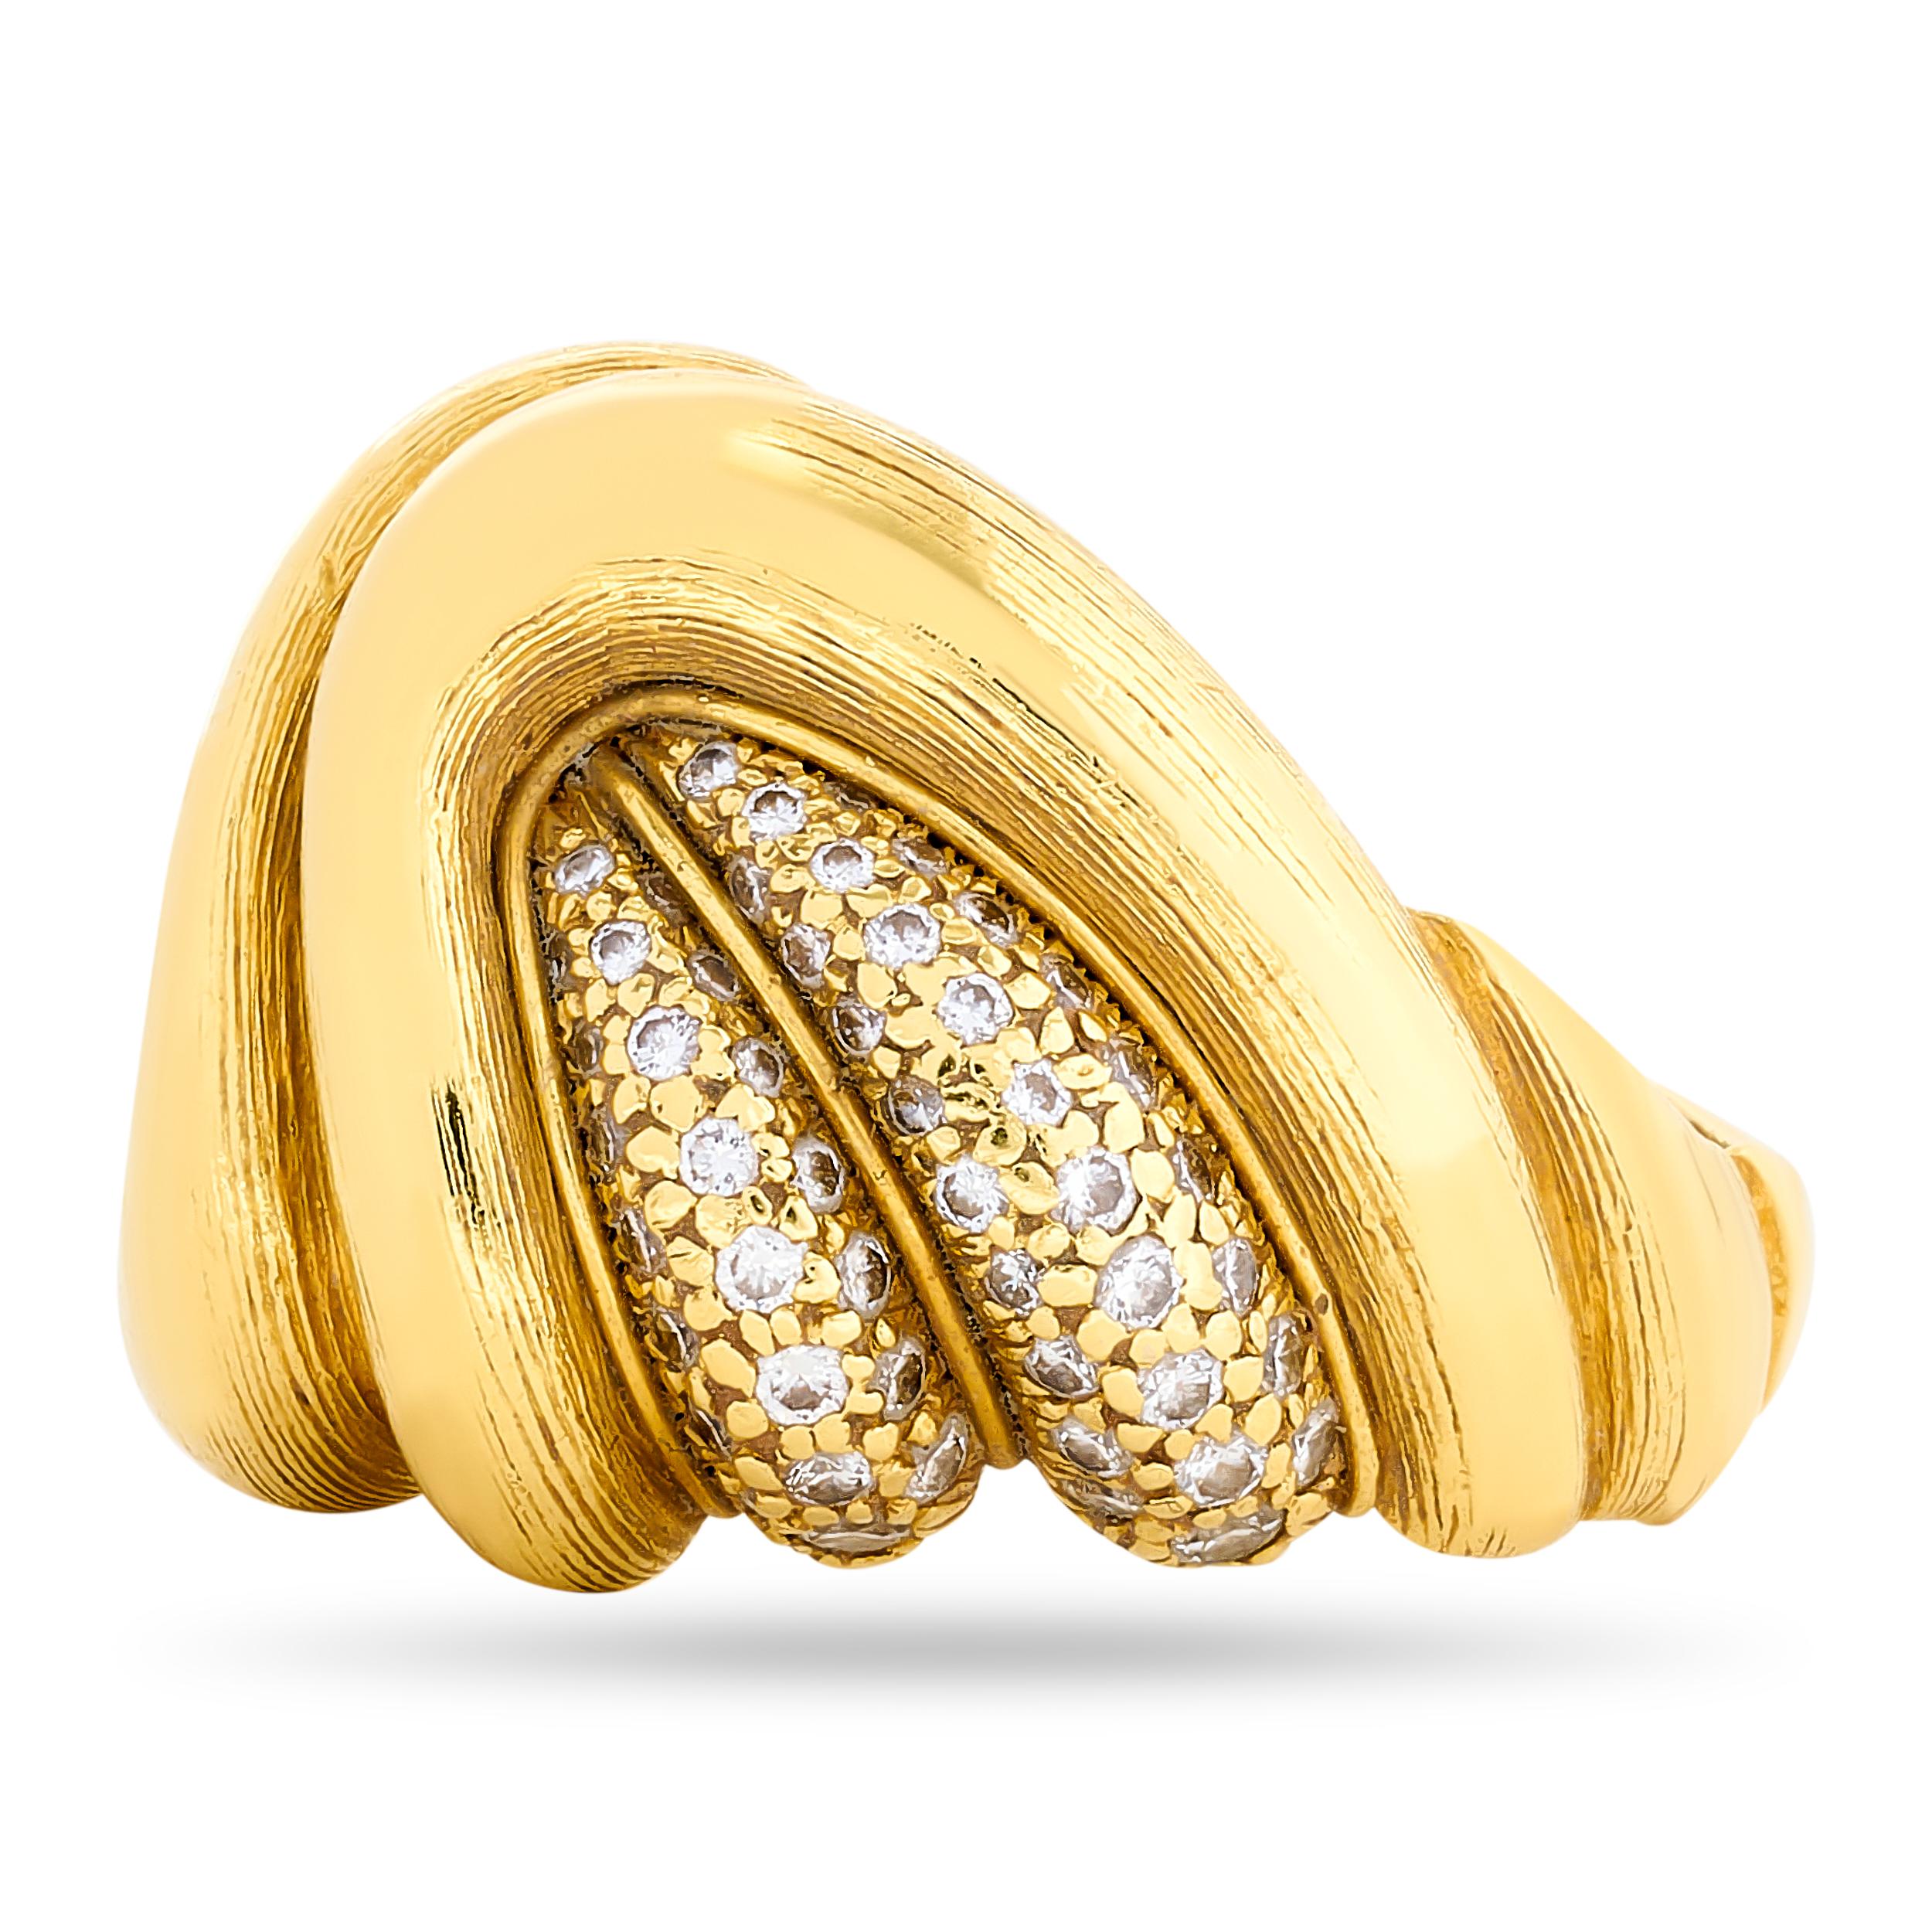 Unleashing the artistry of gold and diamonds. This Henry Dunay brushed gold diamond swirl ring is a symbol of exquisite craftsmanship and luxurious style.

Made in 18-karat yellow gold, this ring contains 102 round diamonds totaling approximately